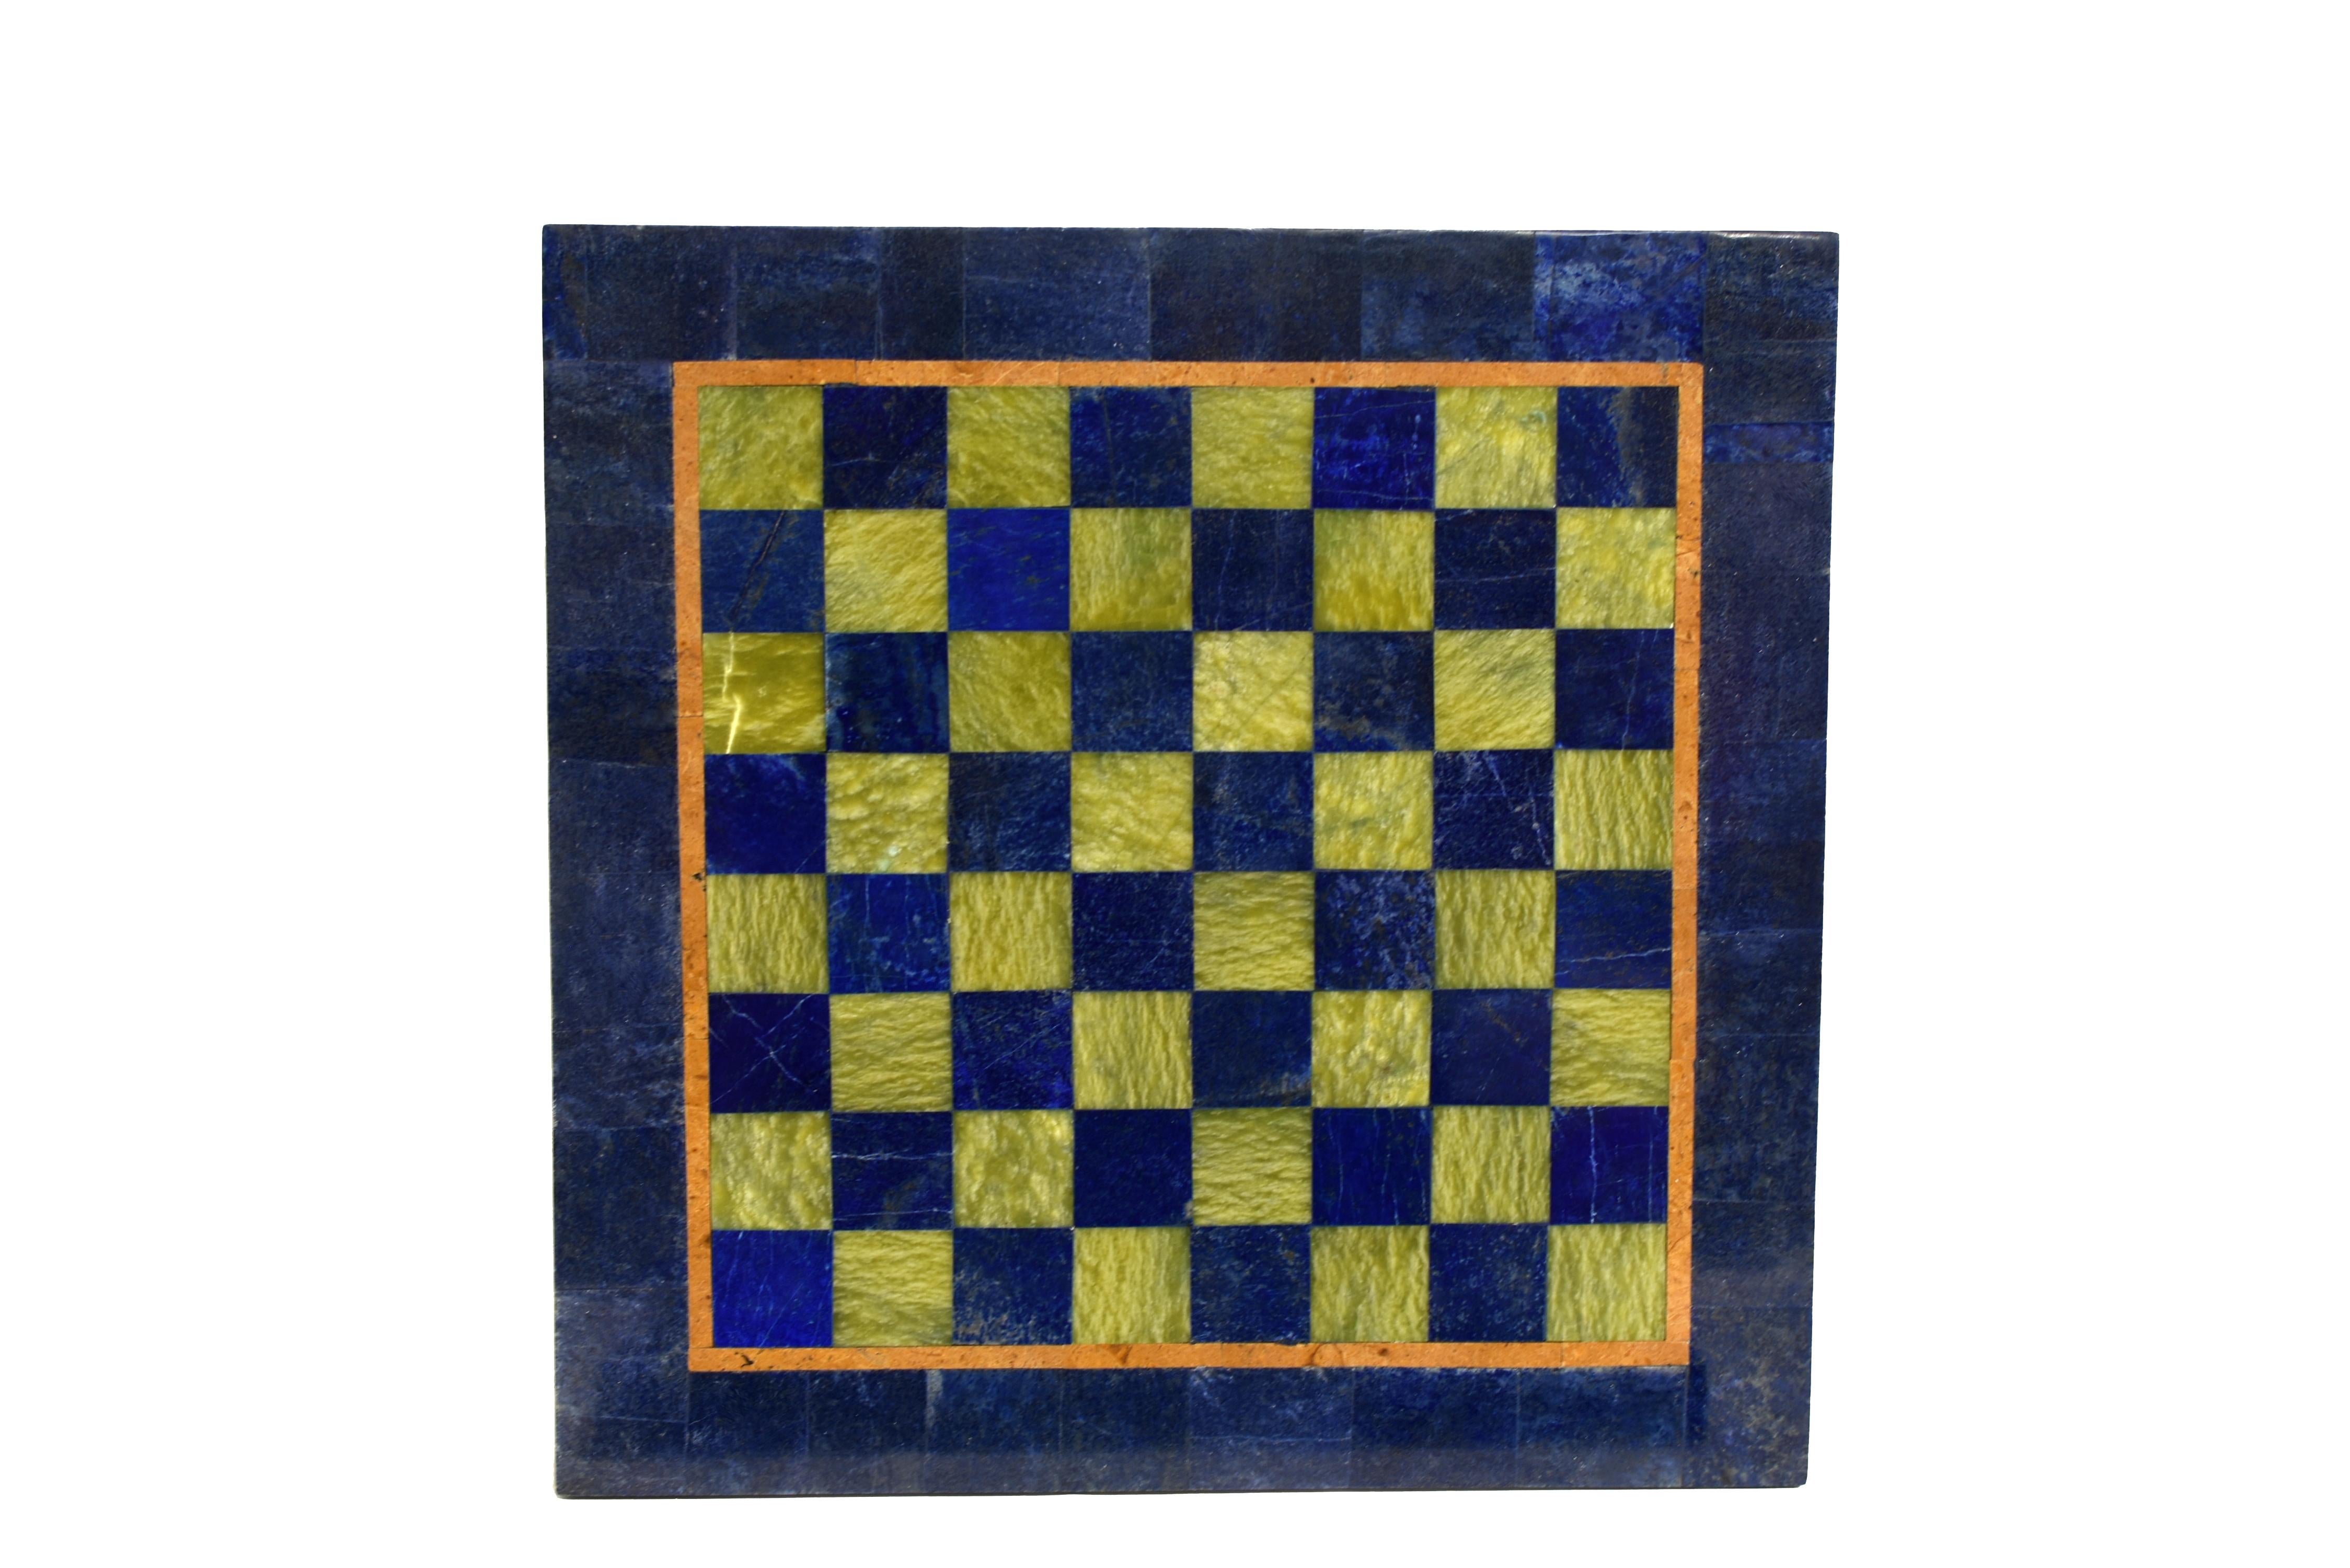 This large, one of a kind gemstone chess set is a stunning testament to traditional craftsmanship and unparalleled artistry. At its heart lies a magnificent lapis lazuli chessboard with hand-cut mosaic of blue lapis lazuli and verdant serpentine